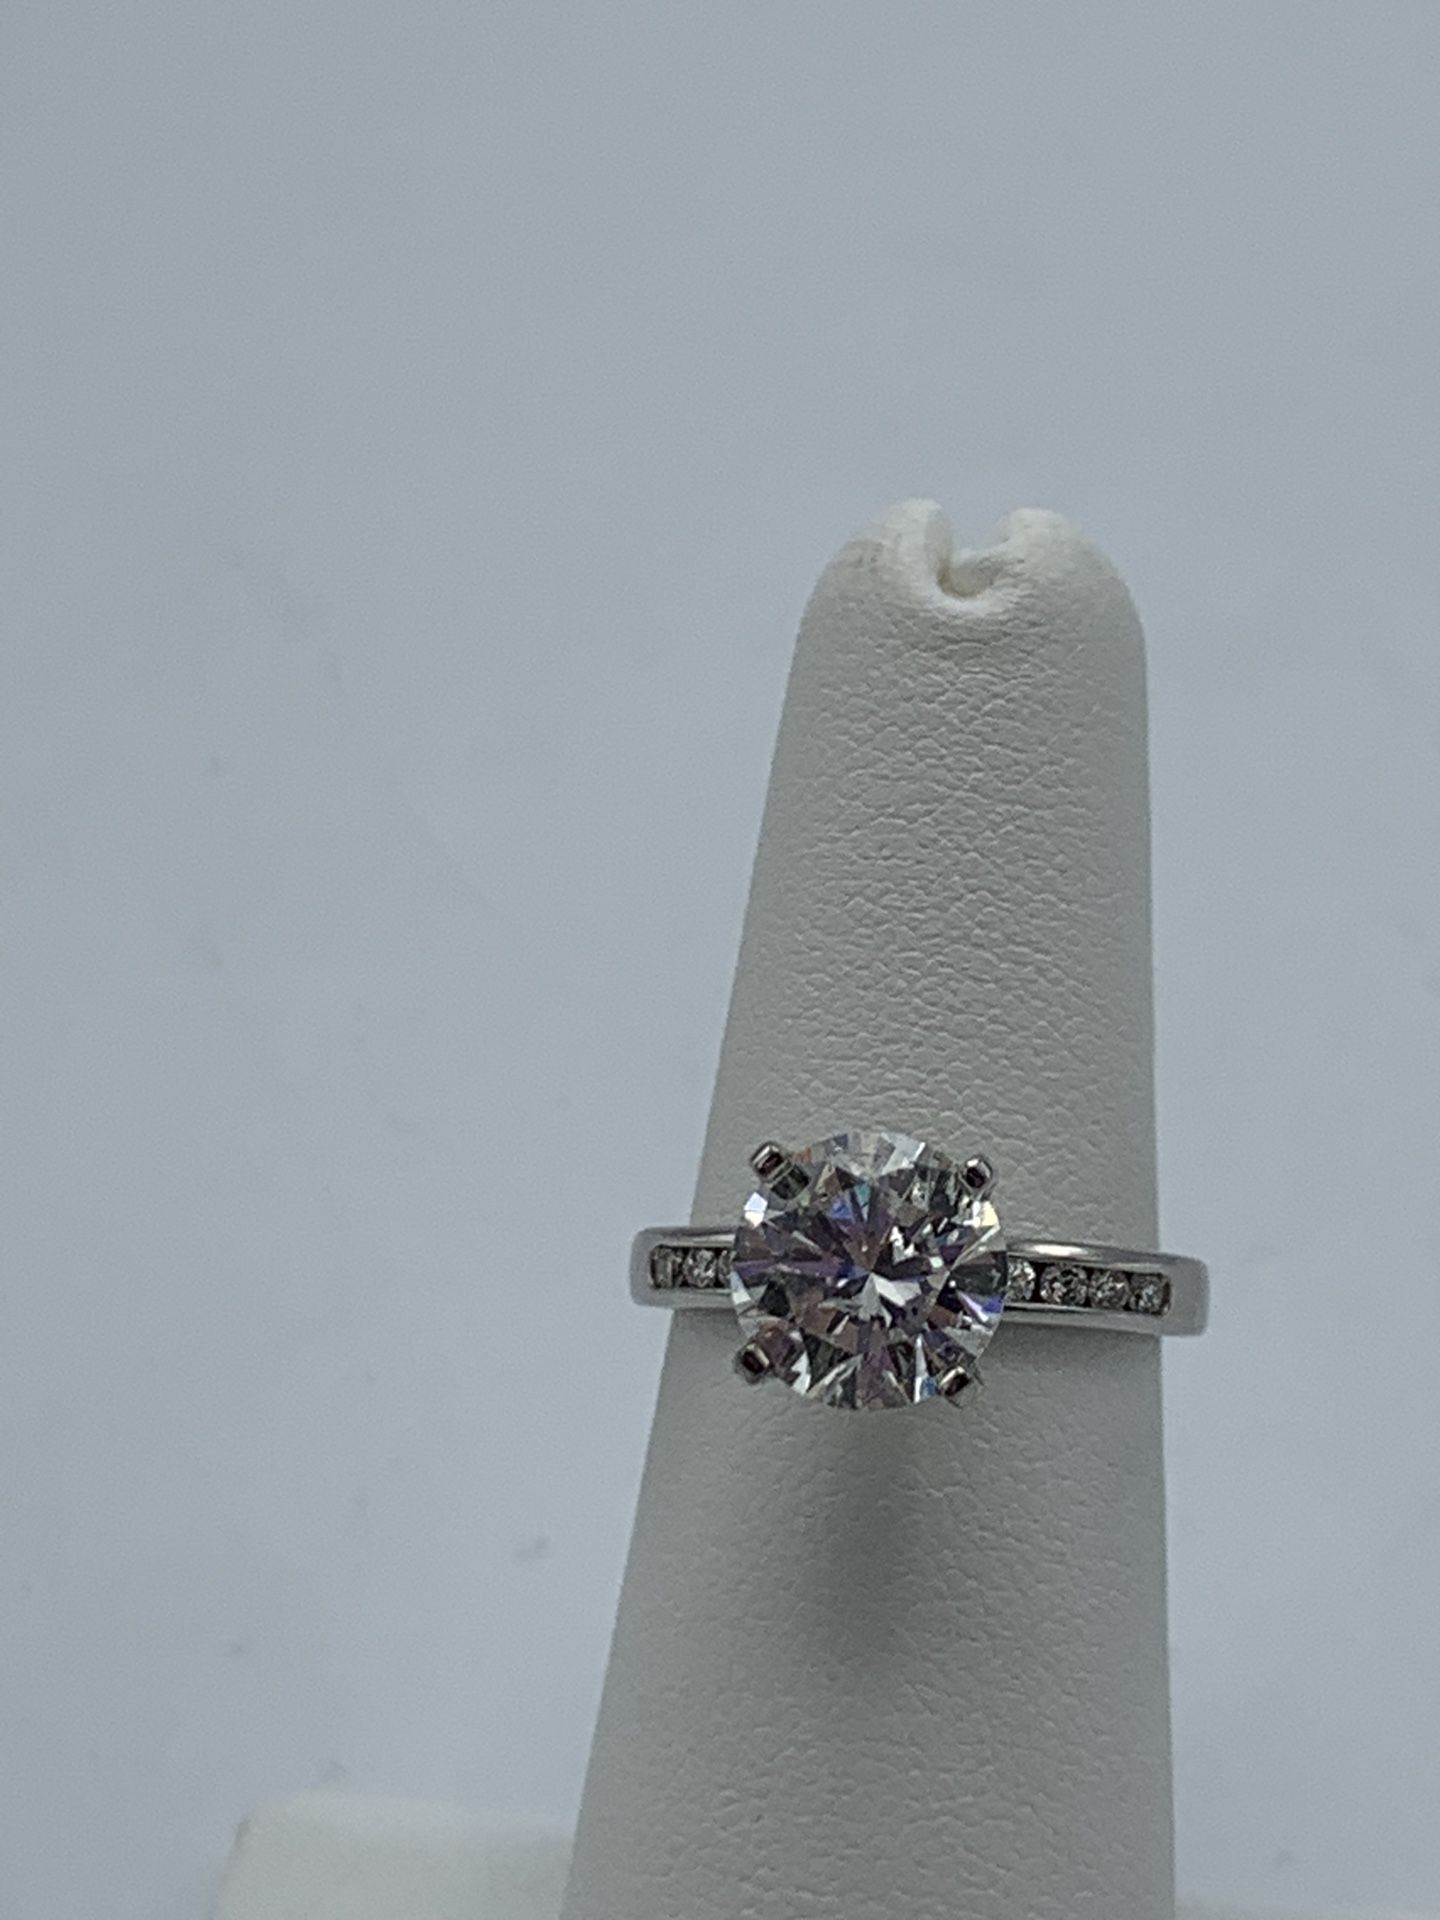 14 Kt White Gold Solitaire Ring 2.32ct Round Diamond